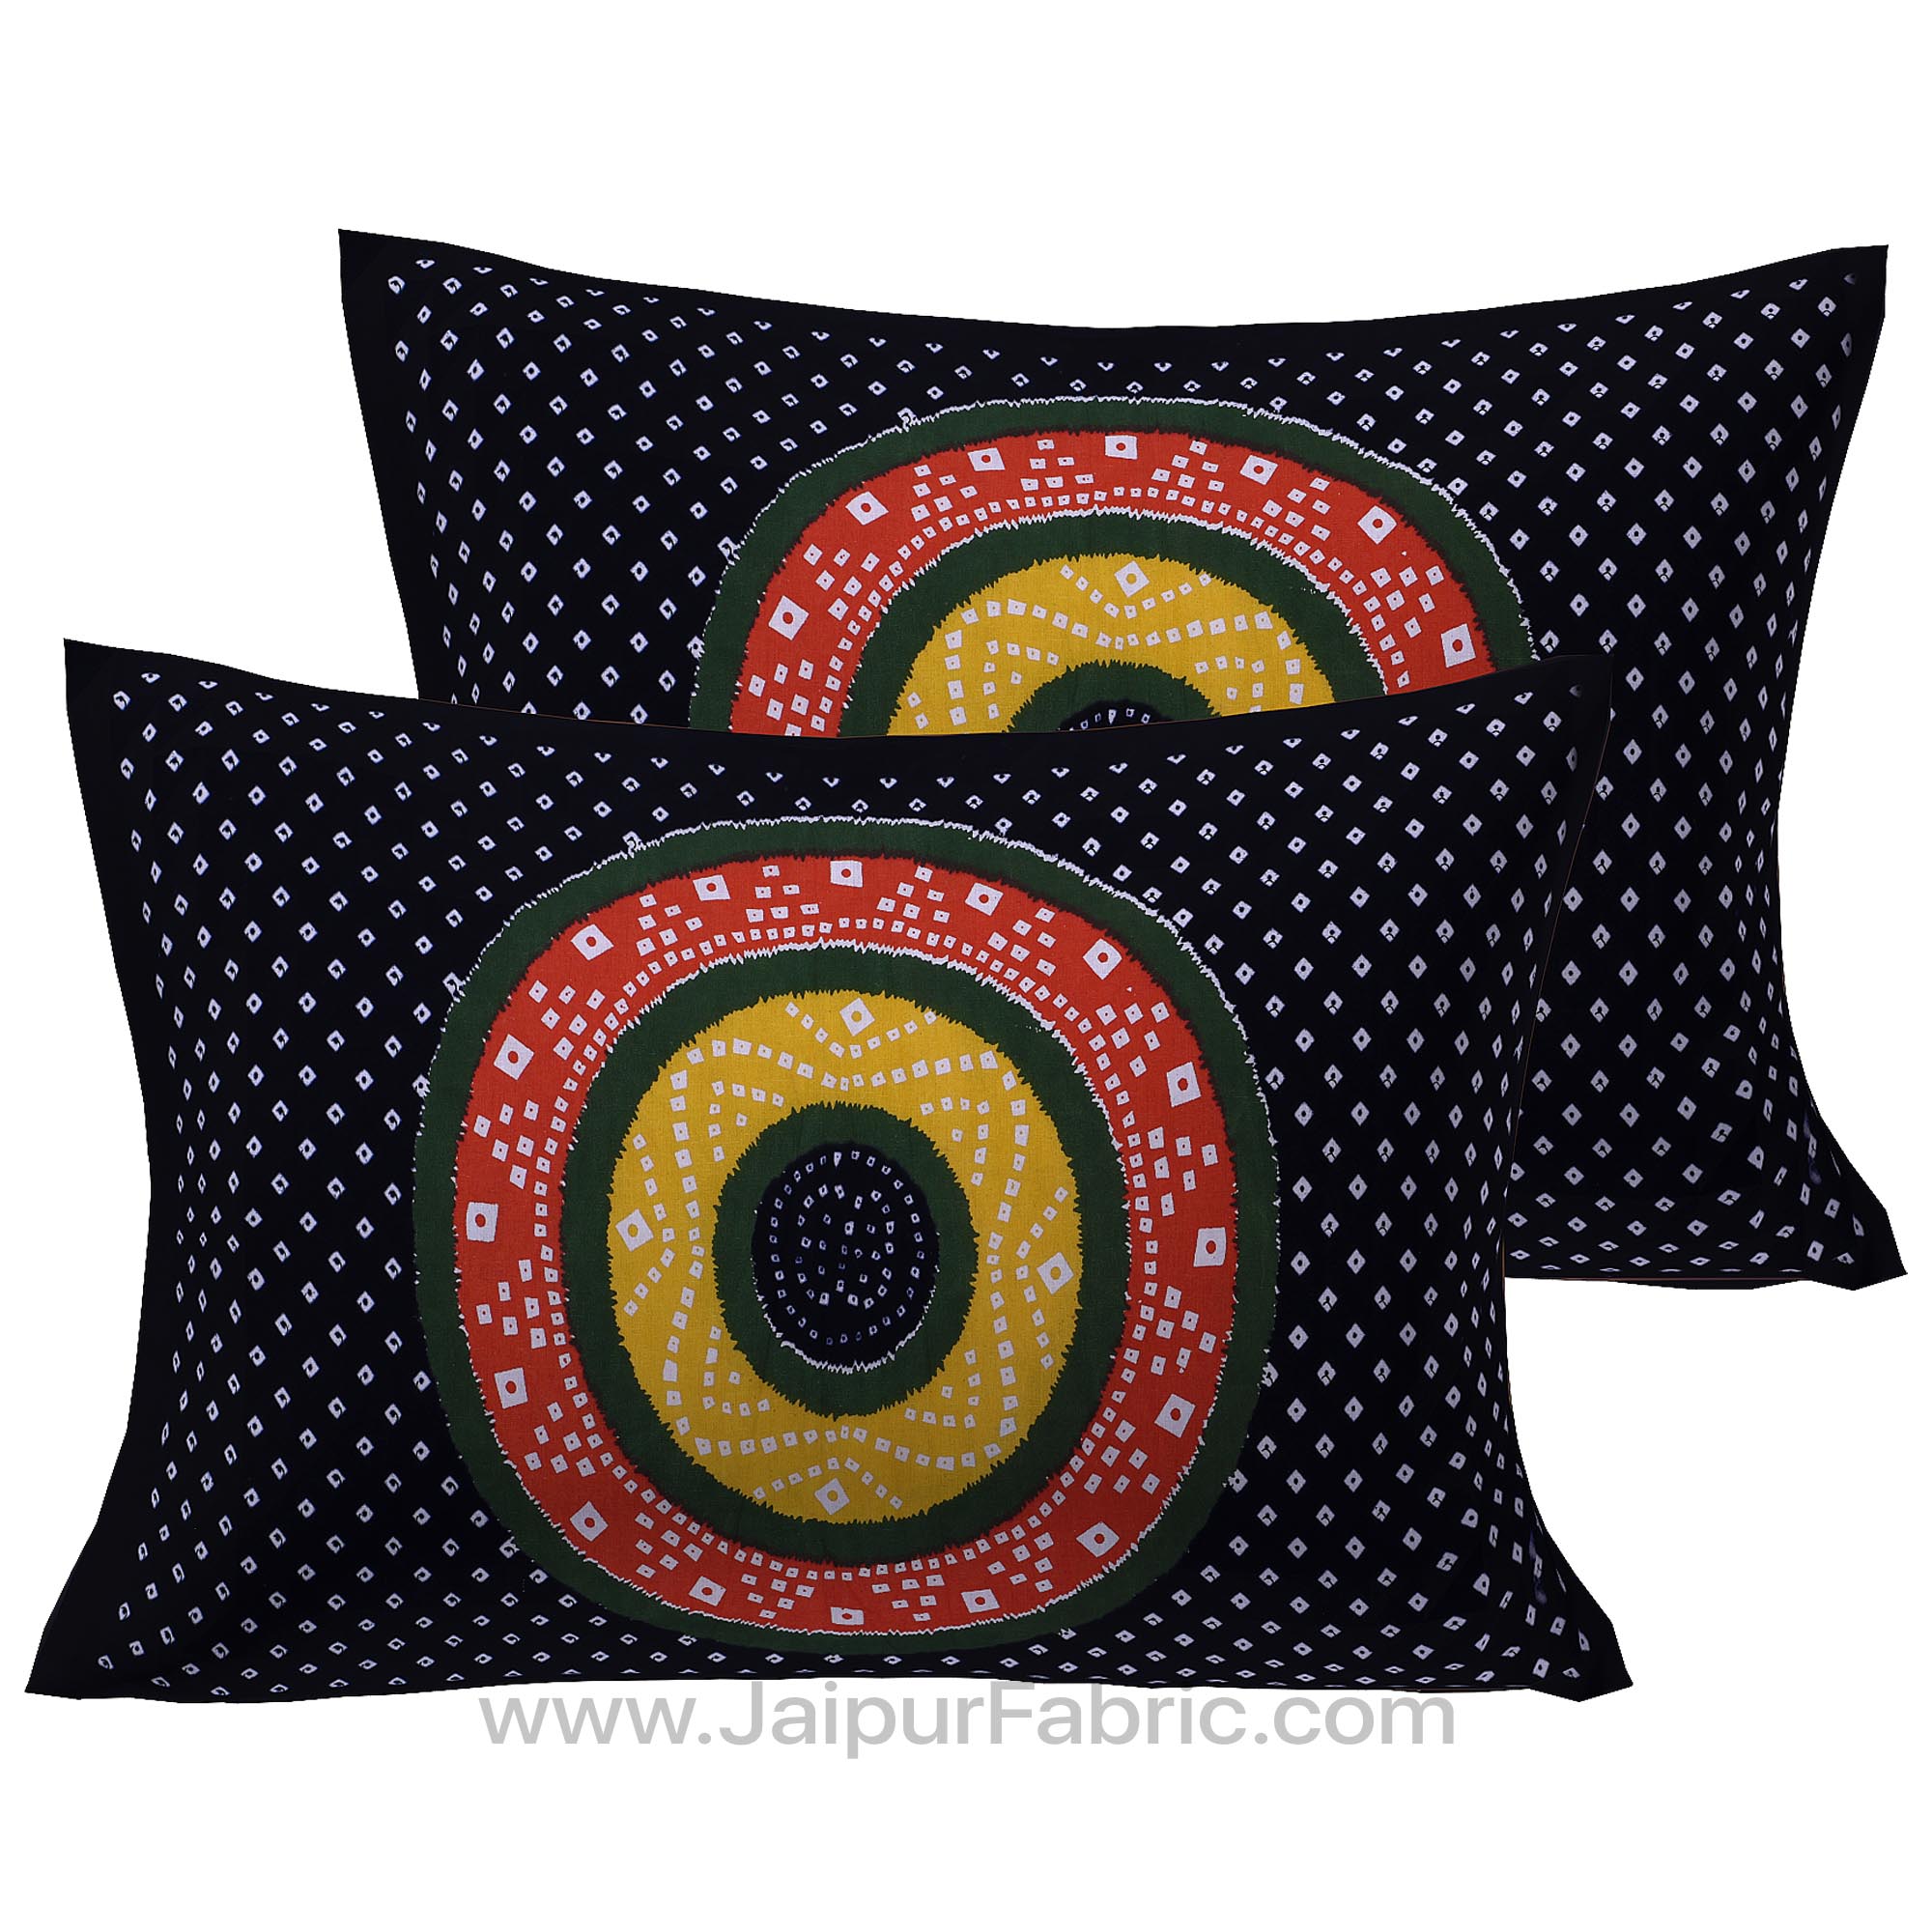 Double Bedsheet Black Red  With Round Shape Bandhej Print